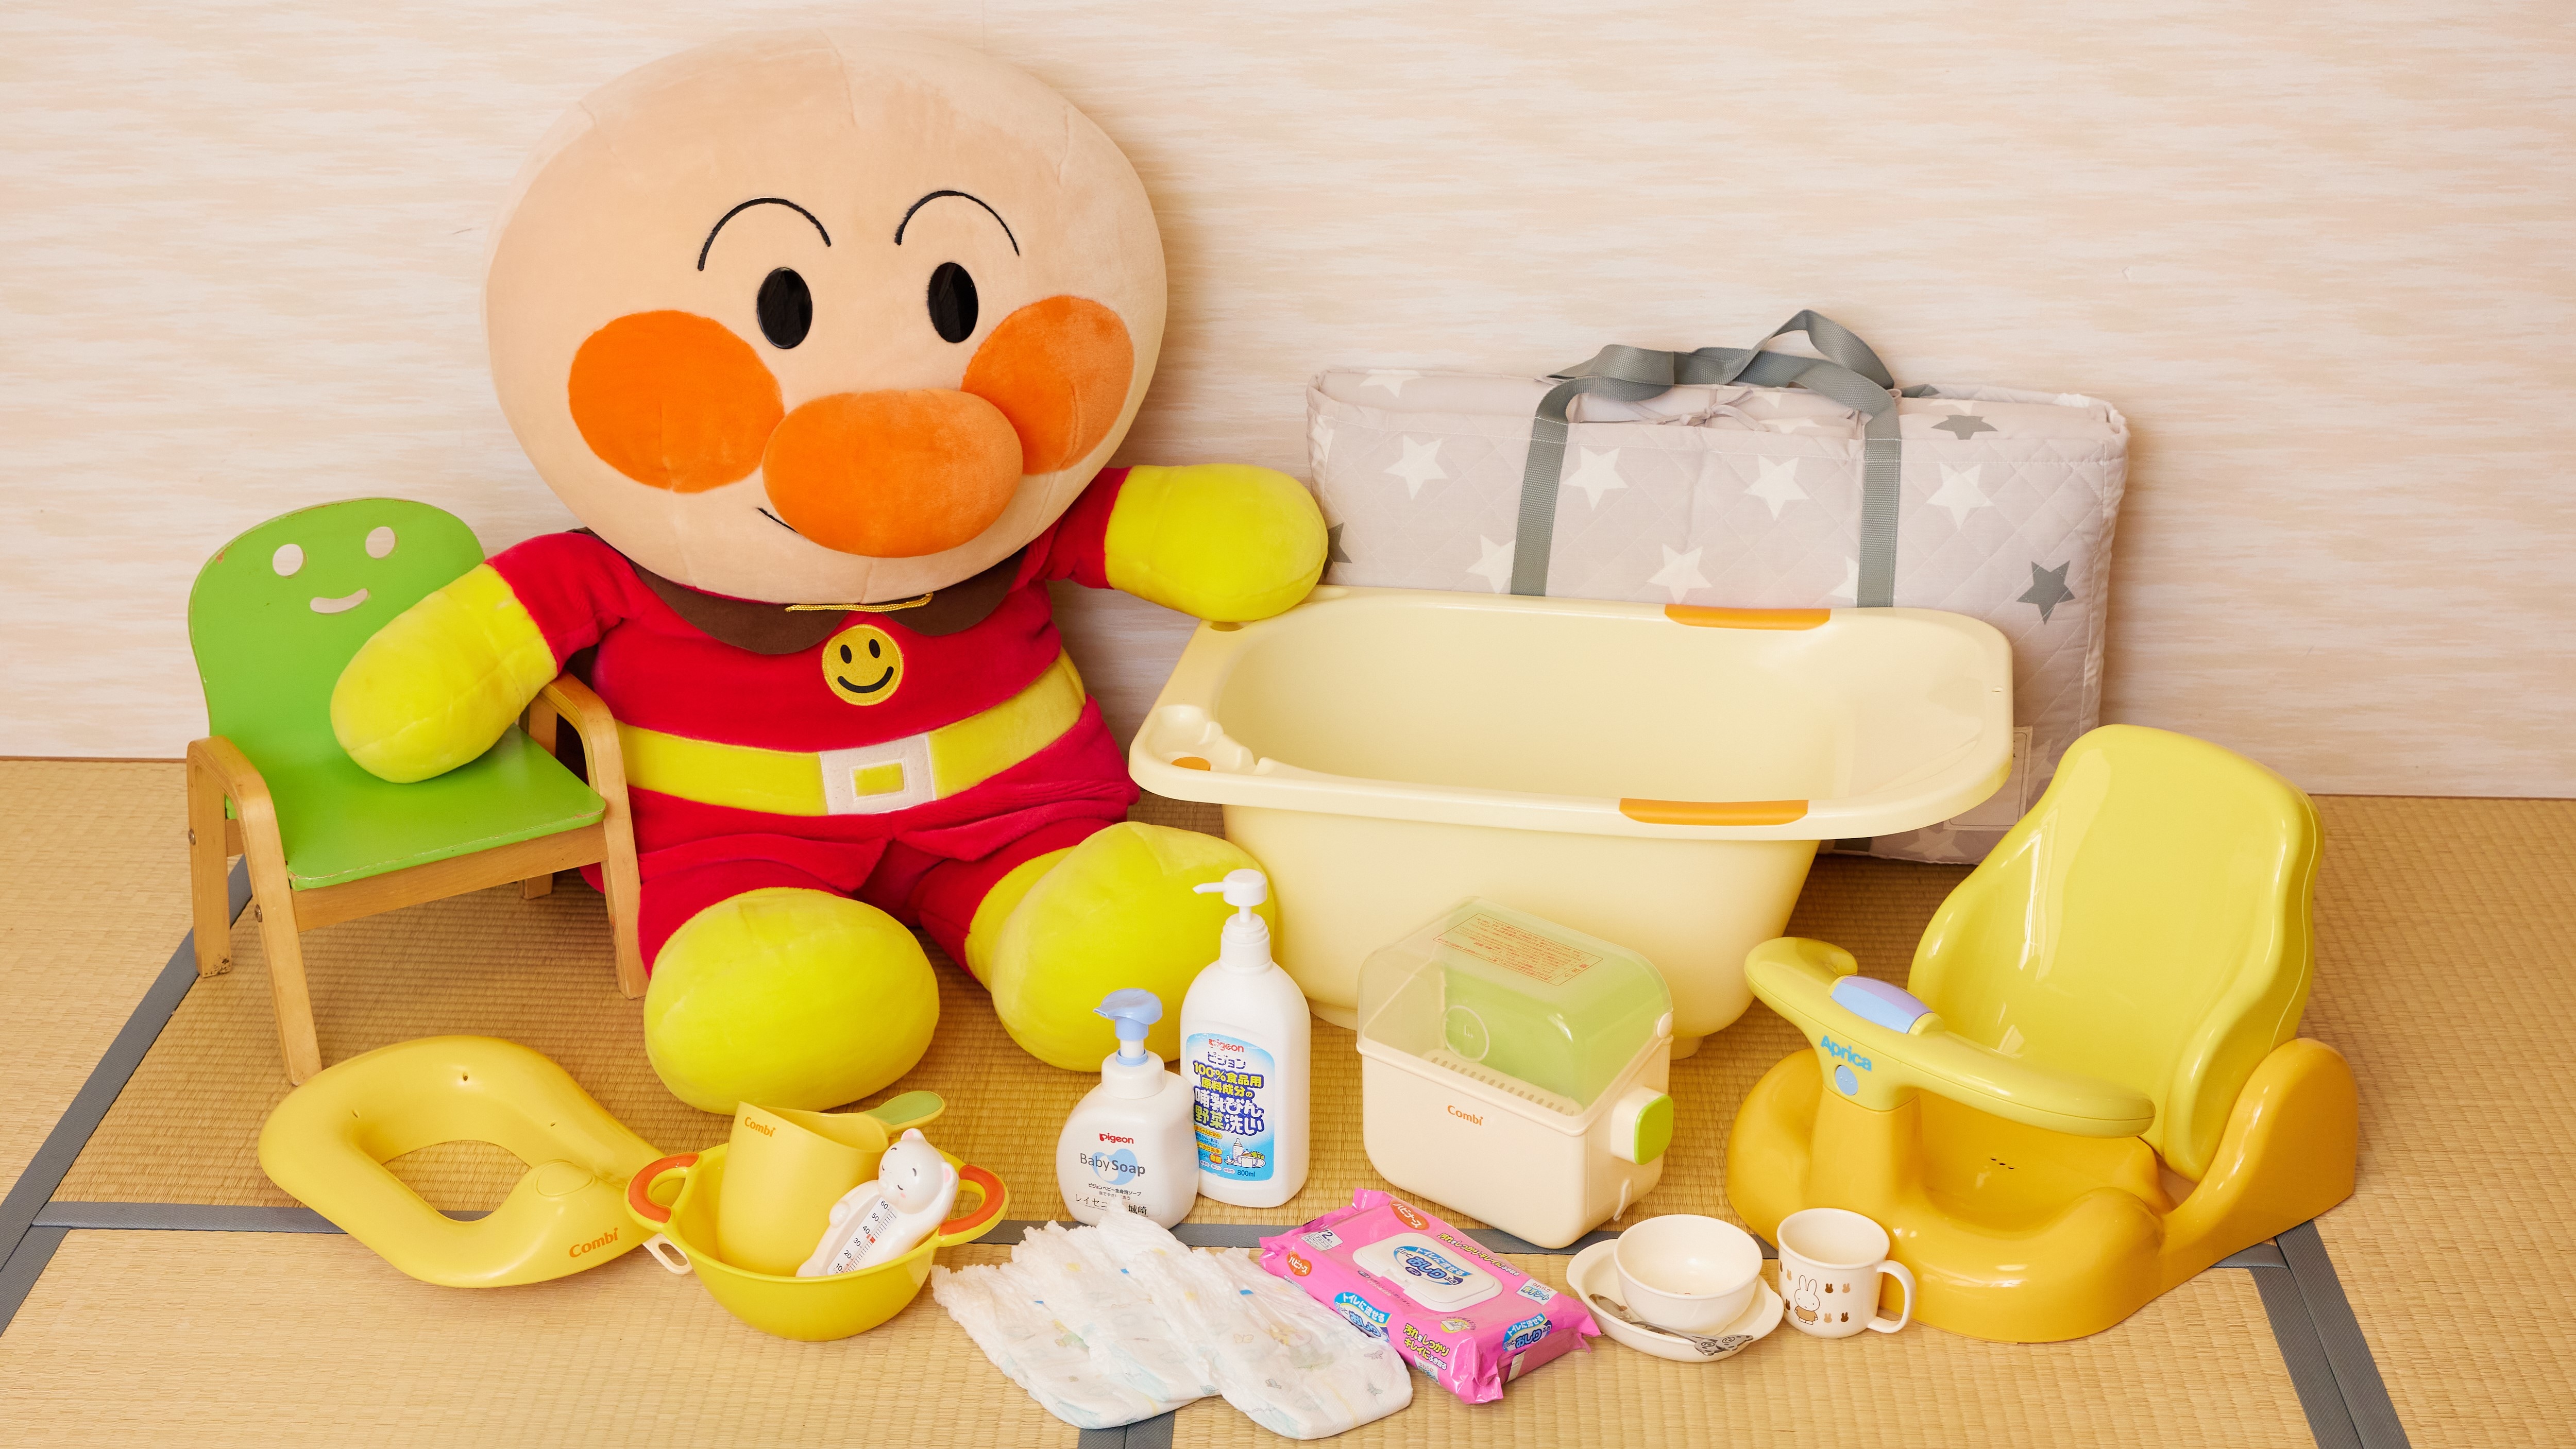 [Kids Room] We have many kids/baby goods available!